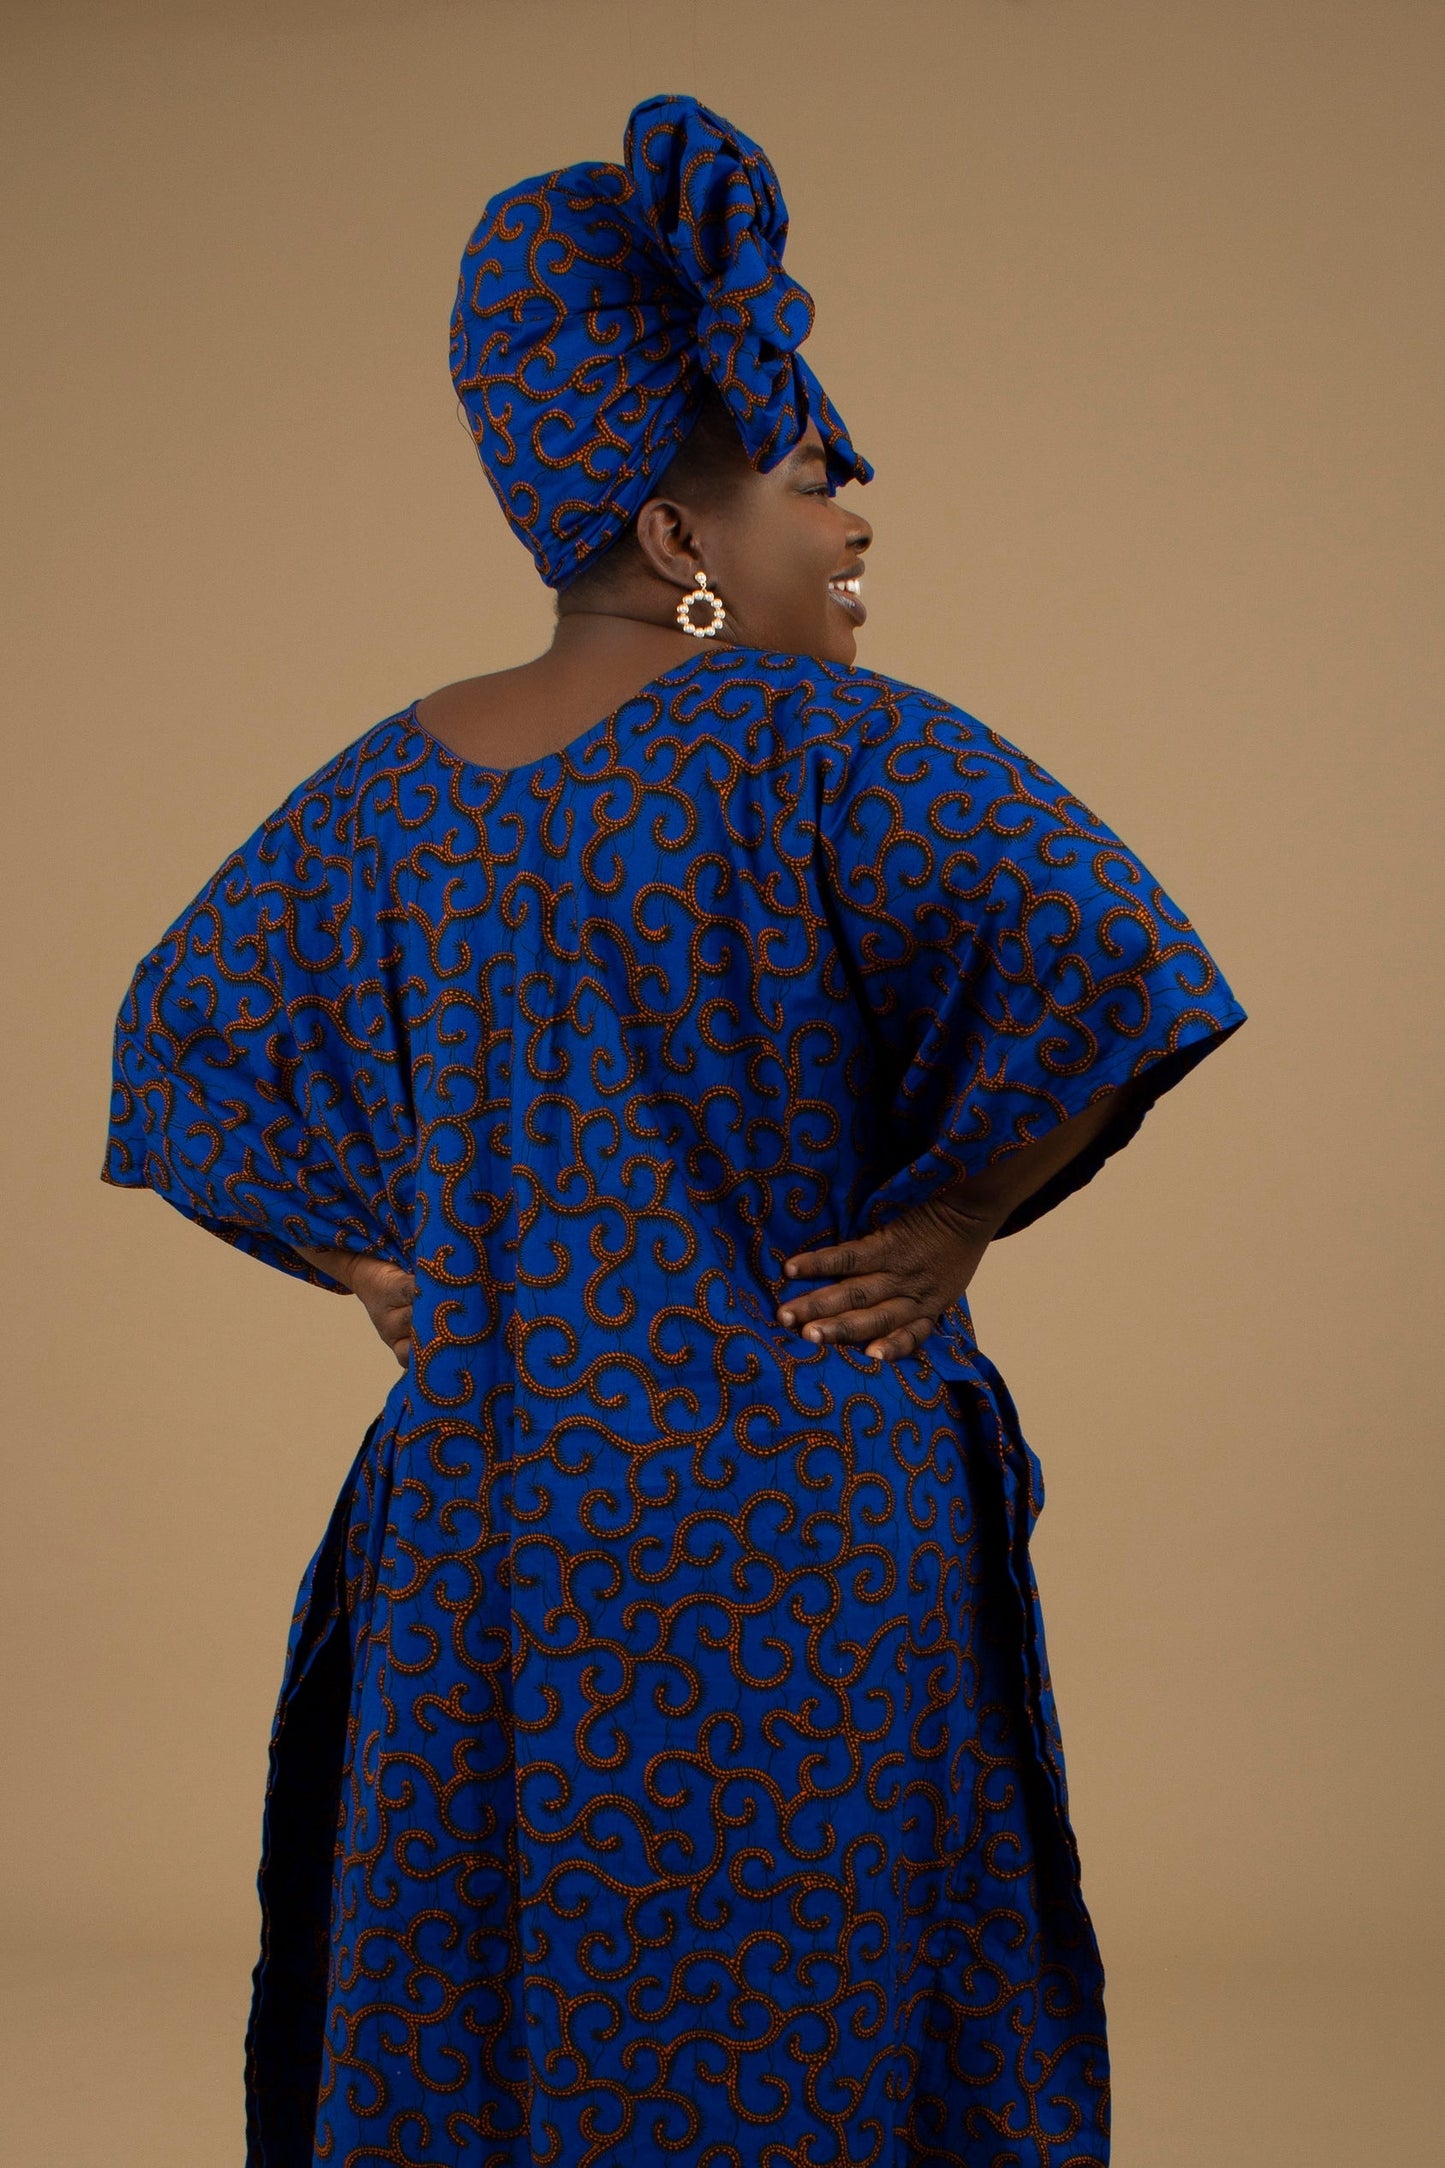 The Ore Floor Length lightweight African Print Kaftan Dress in Ankara wax print in a deep blue and orange swirling African Print pattern is ethically sourced cotton. Designed in England Made in Nigeria. 